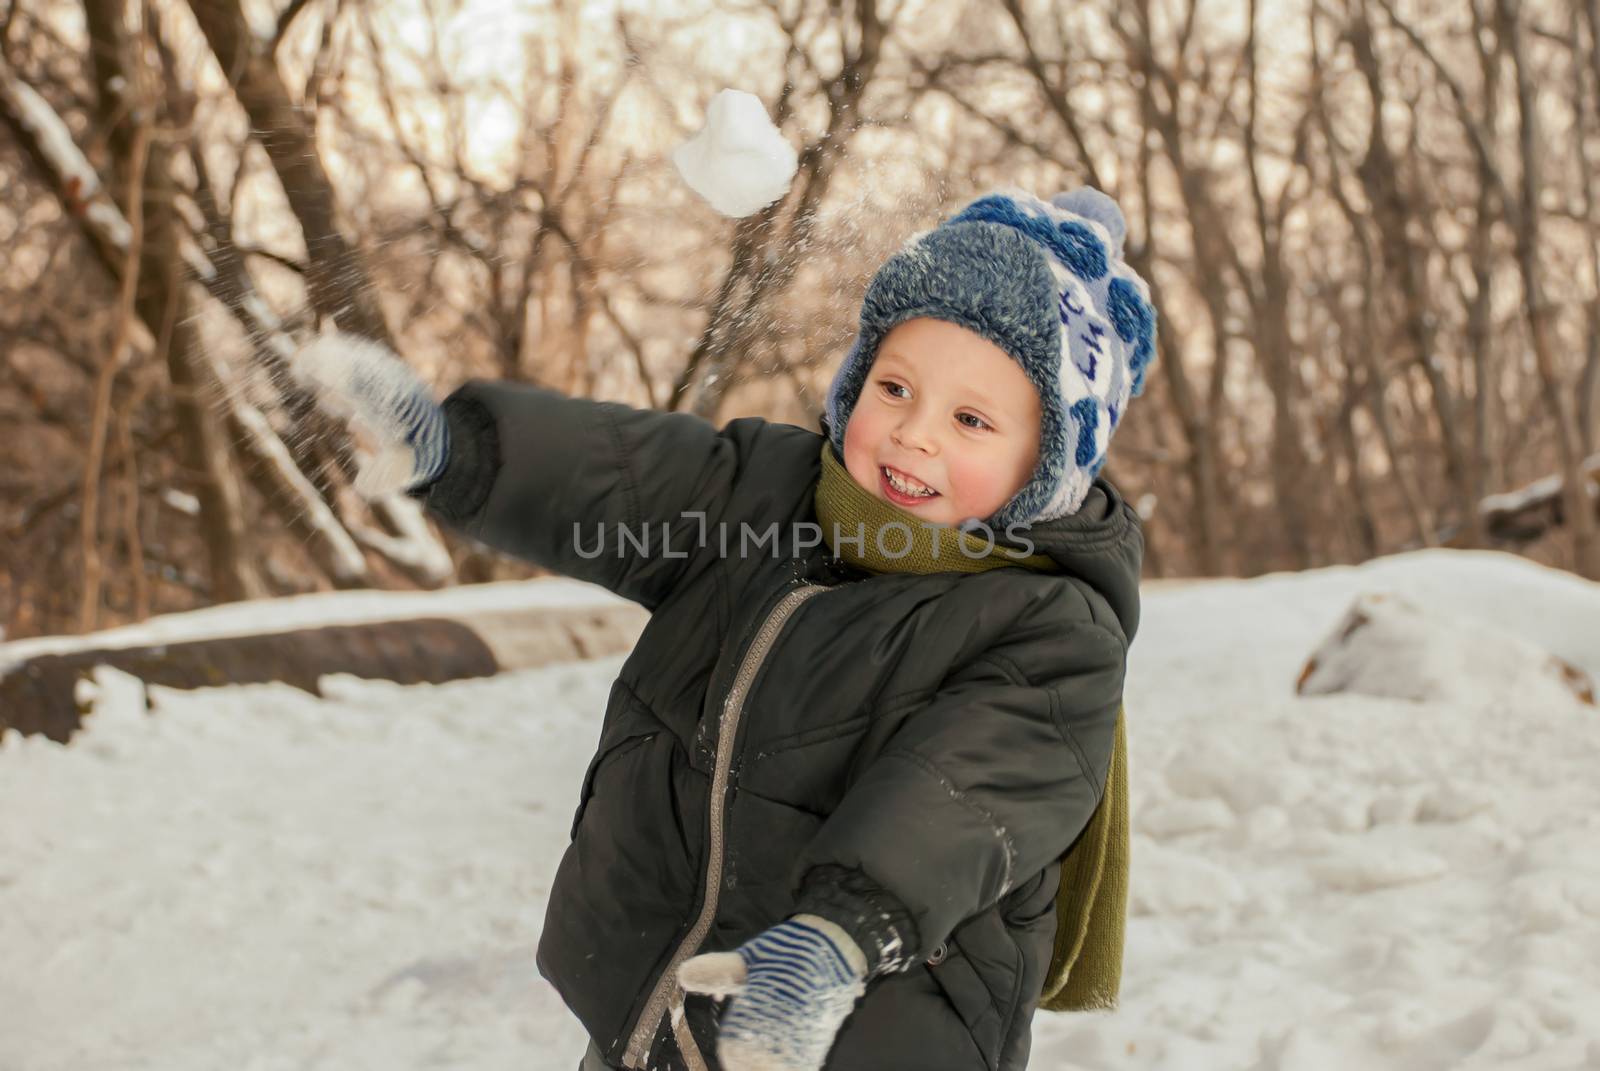 Little boy playing in the snow outdoors in winter.